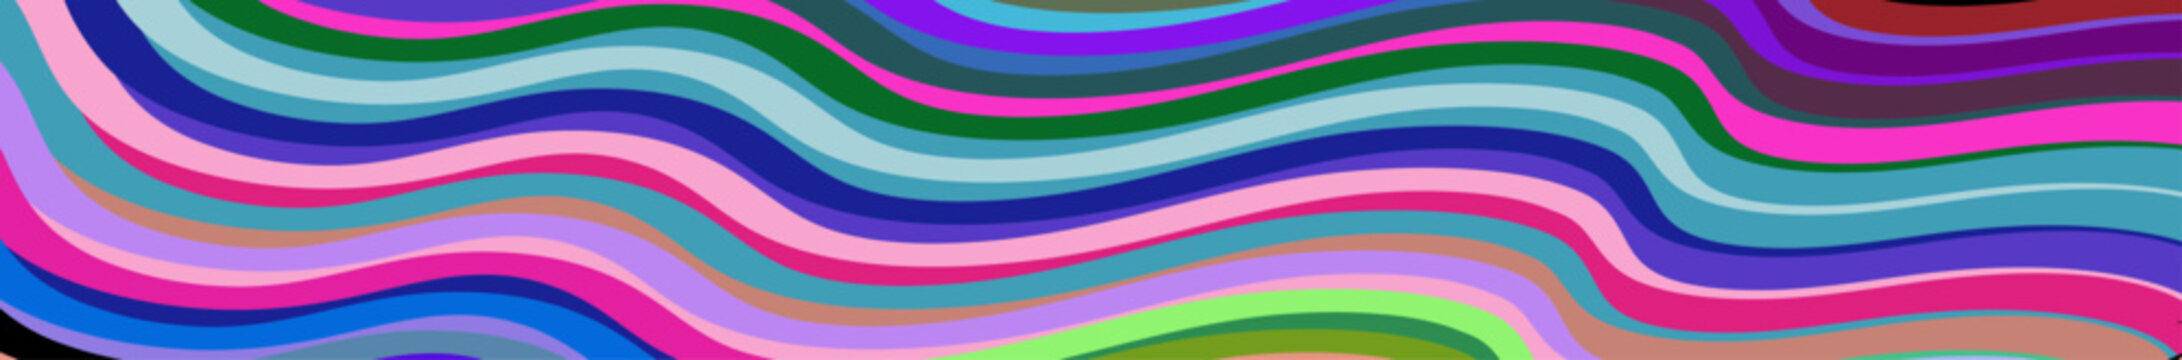 Abstract colorful pattern of wavy lines. Composition in the form of an arbitrary multi-colored background. Vector illustration, EPS 10. Hippie and psychedelic.Copy space.Funky style